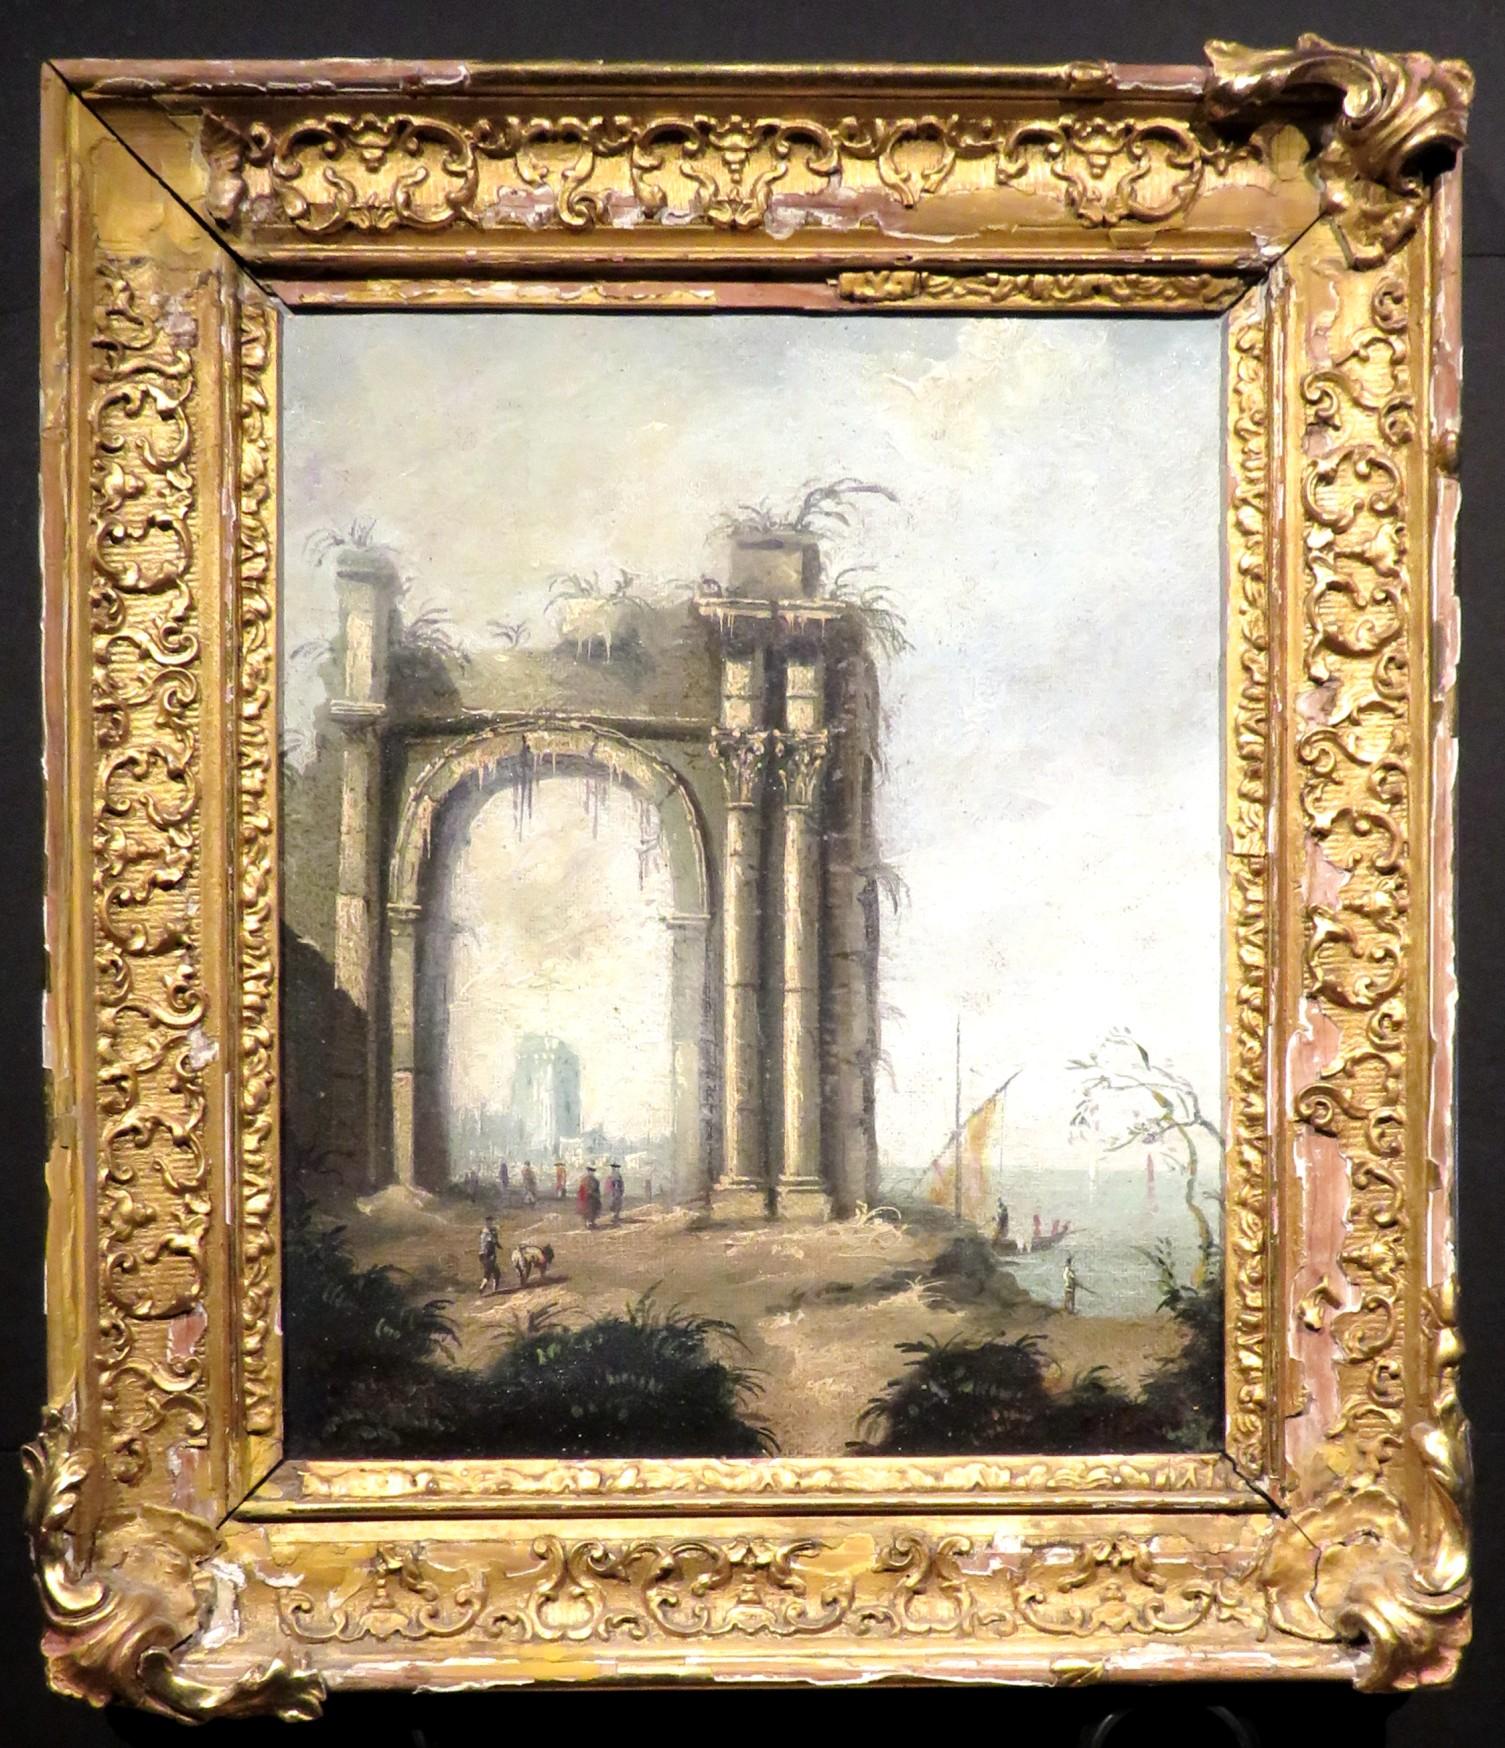 The foreground showing figures walking among the ruins of a triumphal arch, beyond are sailing vessels on the Venetian Lagoon, on the far shoreline is a view of La Torre di Malghera (Tower of Malghera). 
Oil on canvas laid down on a wood panel.